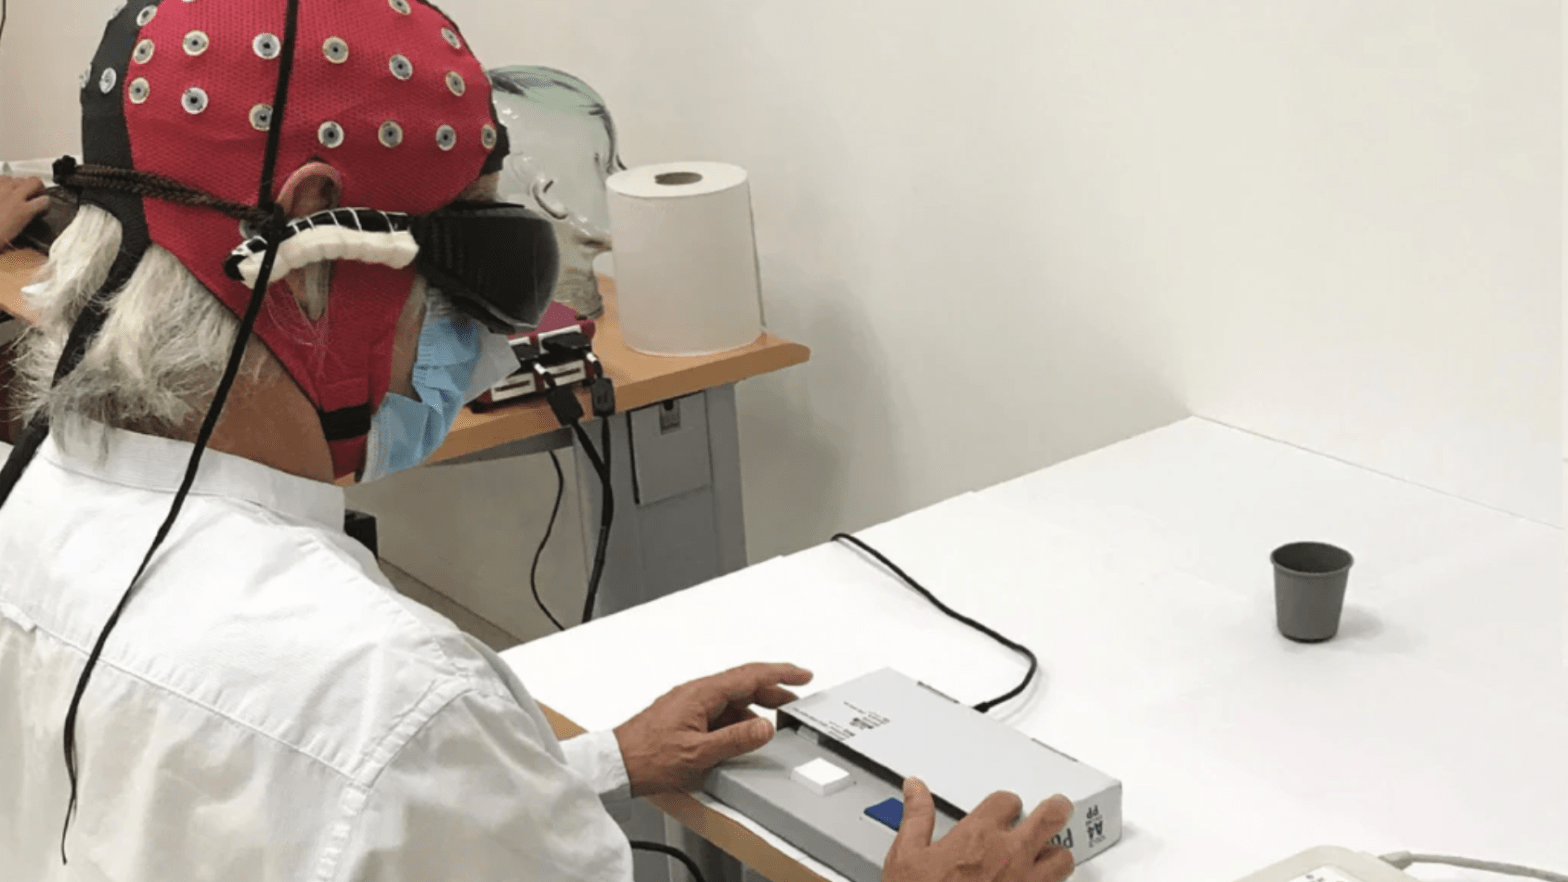 One of the study's researchers demonstrating the set-up used to confirm the success of the gene therapy treatment, including the use of specialised goggles seen above.  (Image: Sahel, et al., Nature Medicine)